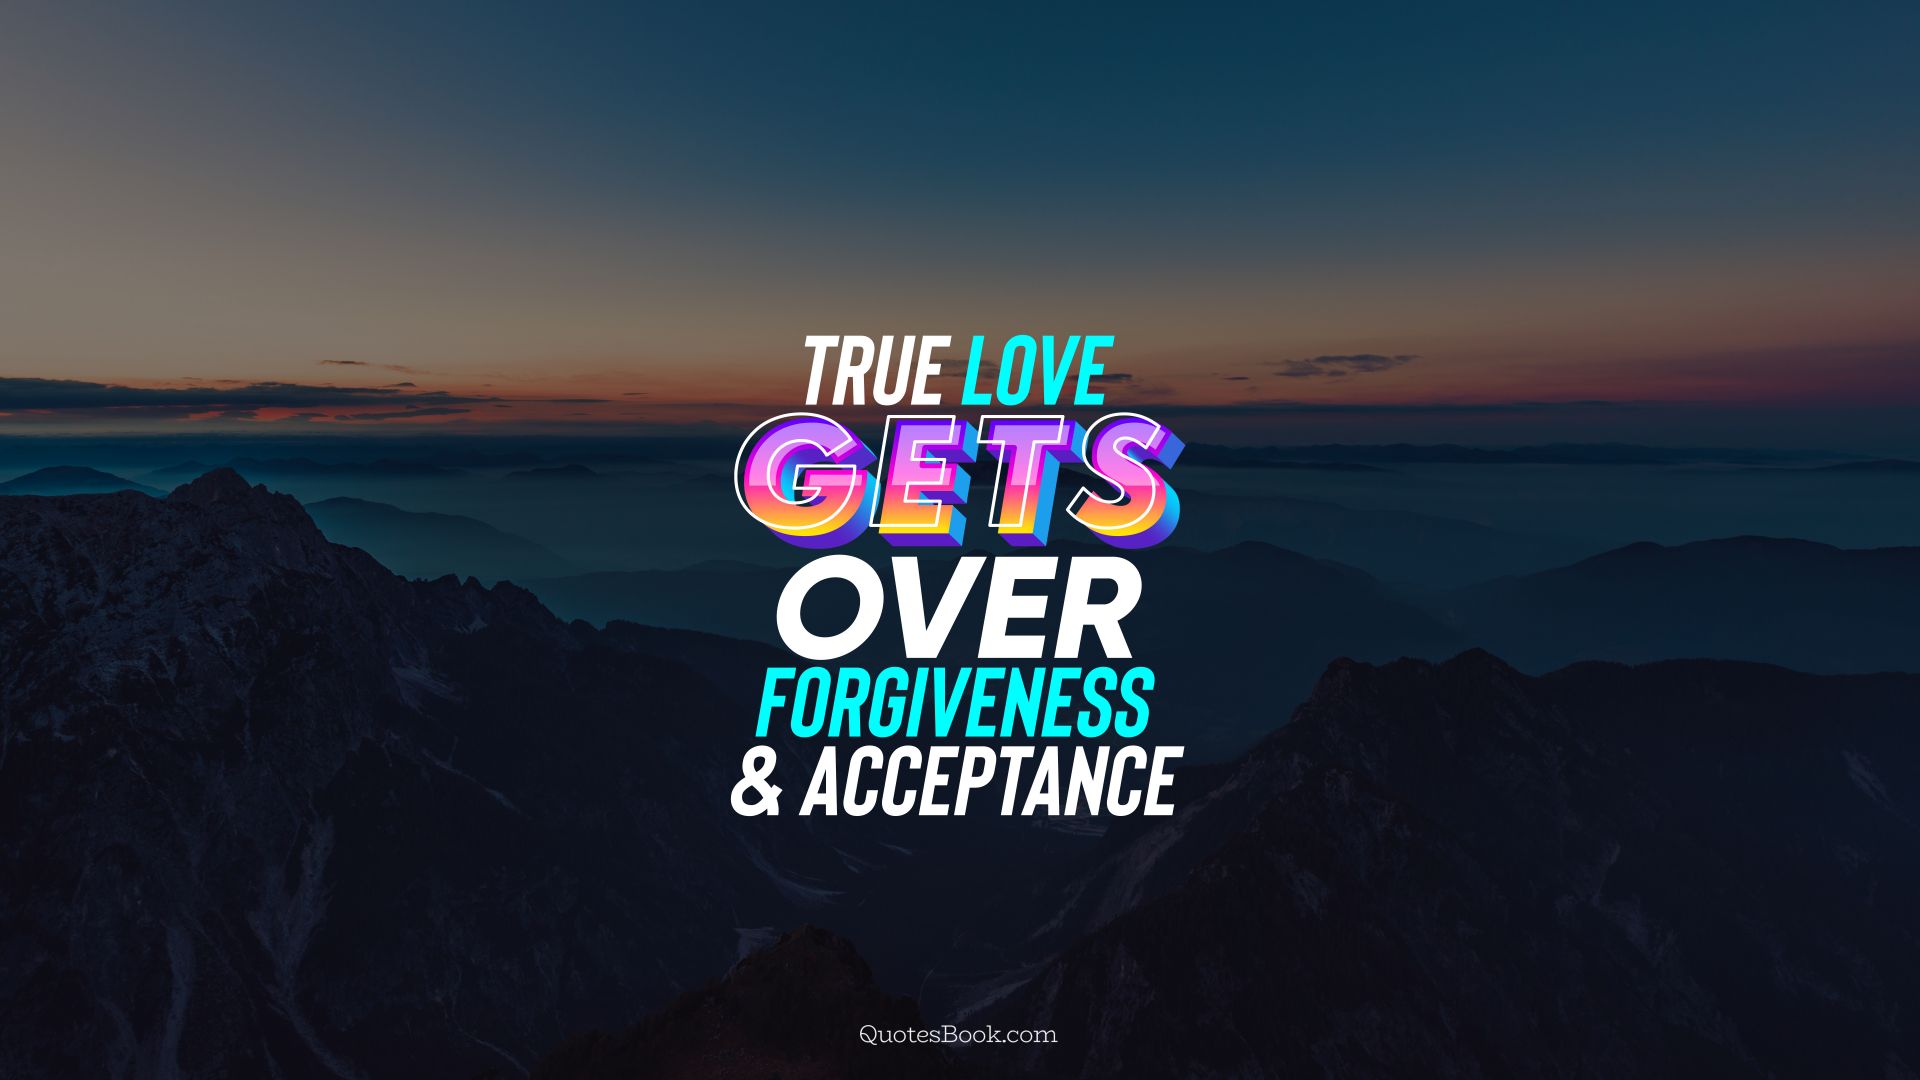 True love gets over forgiveness and acceptance. - Quote by QuotesBook